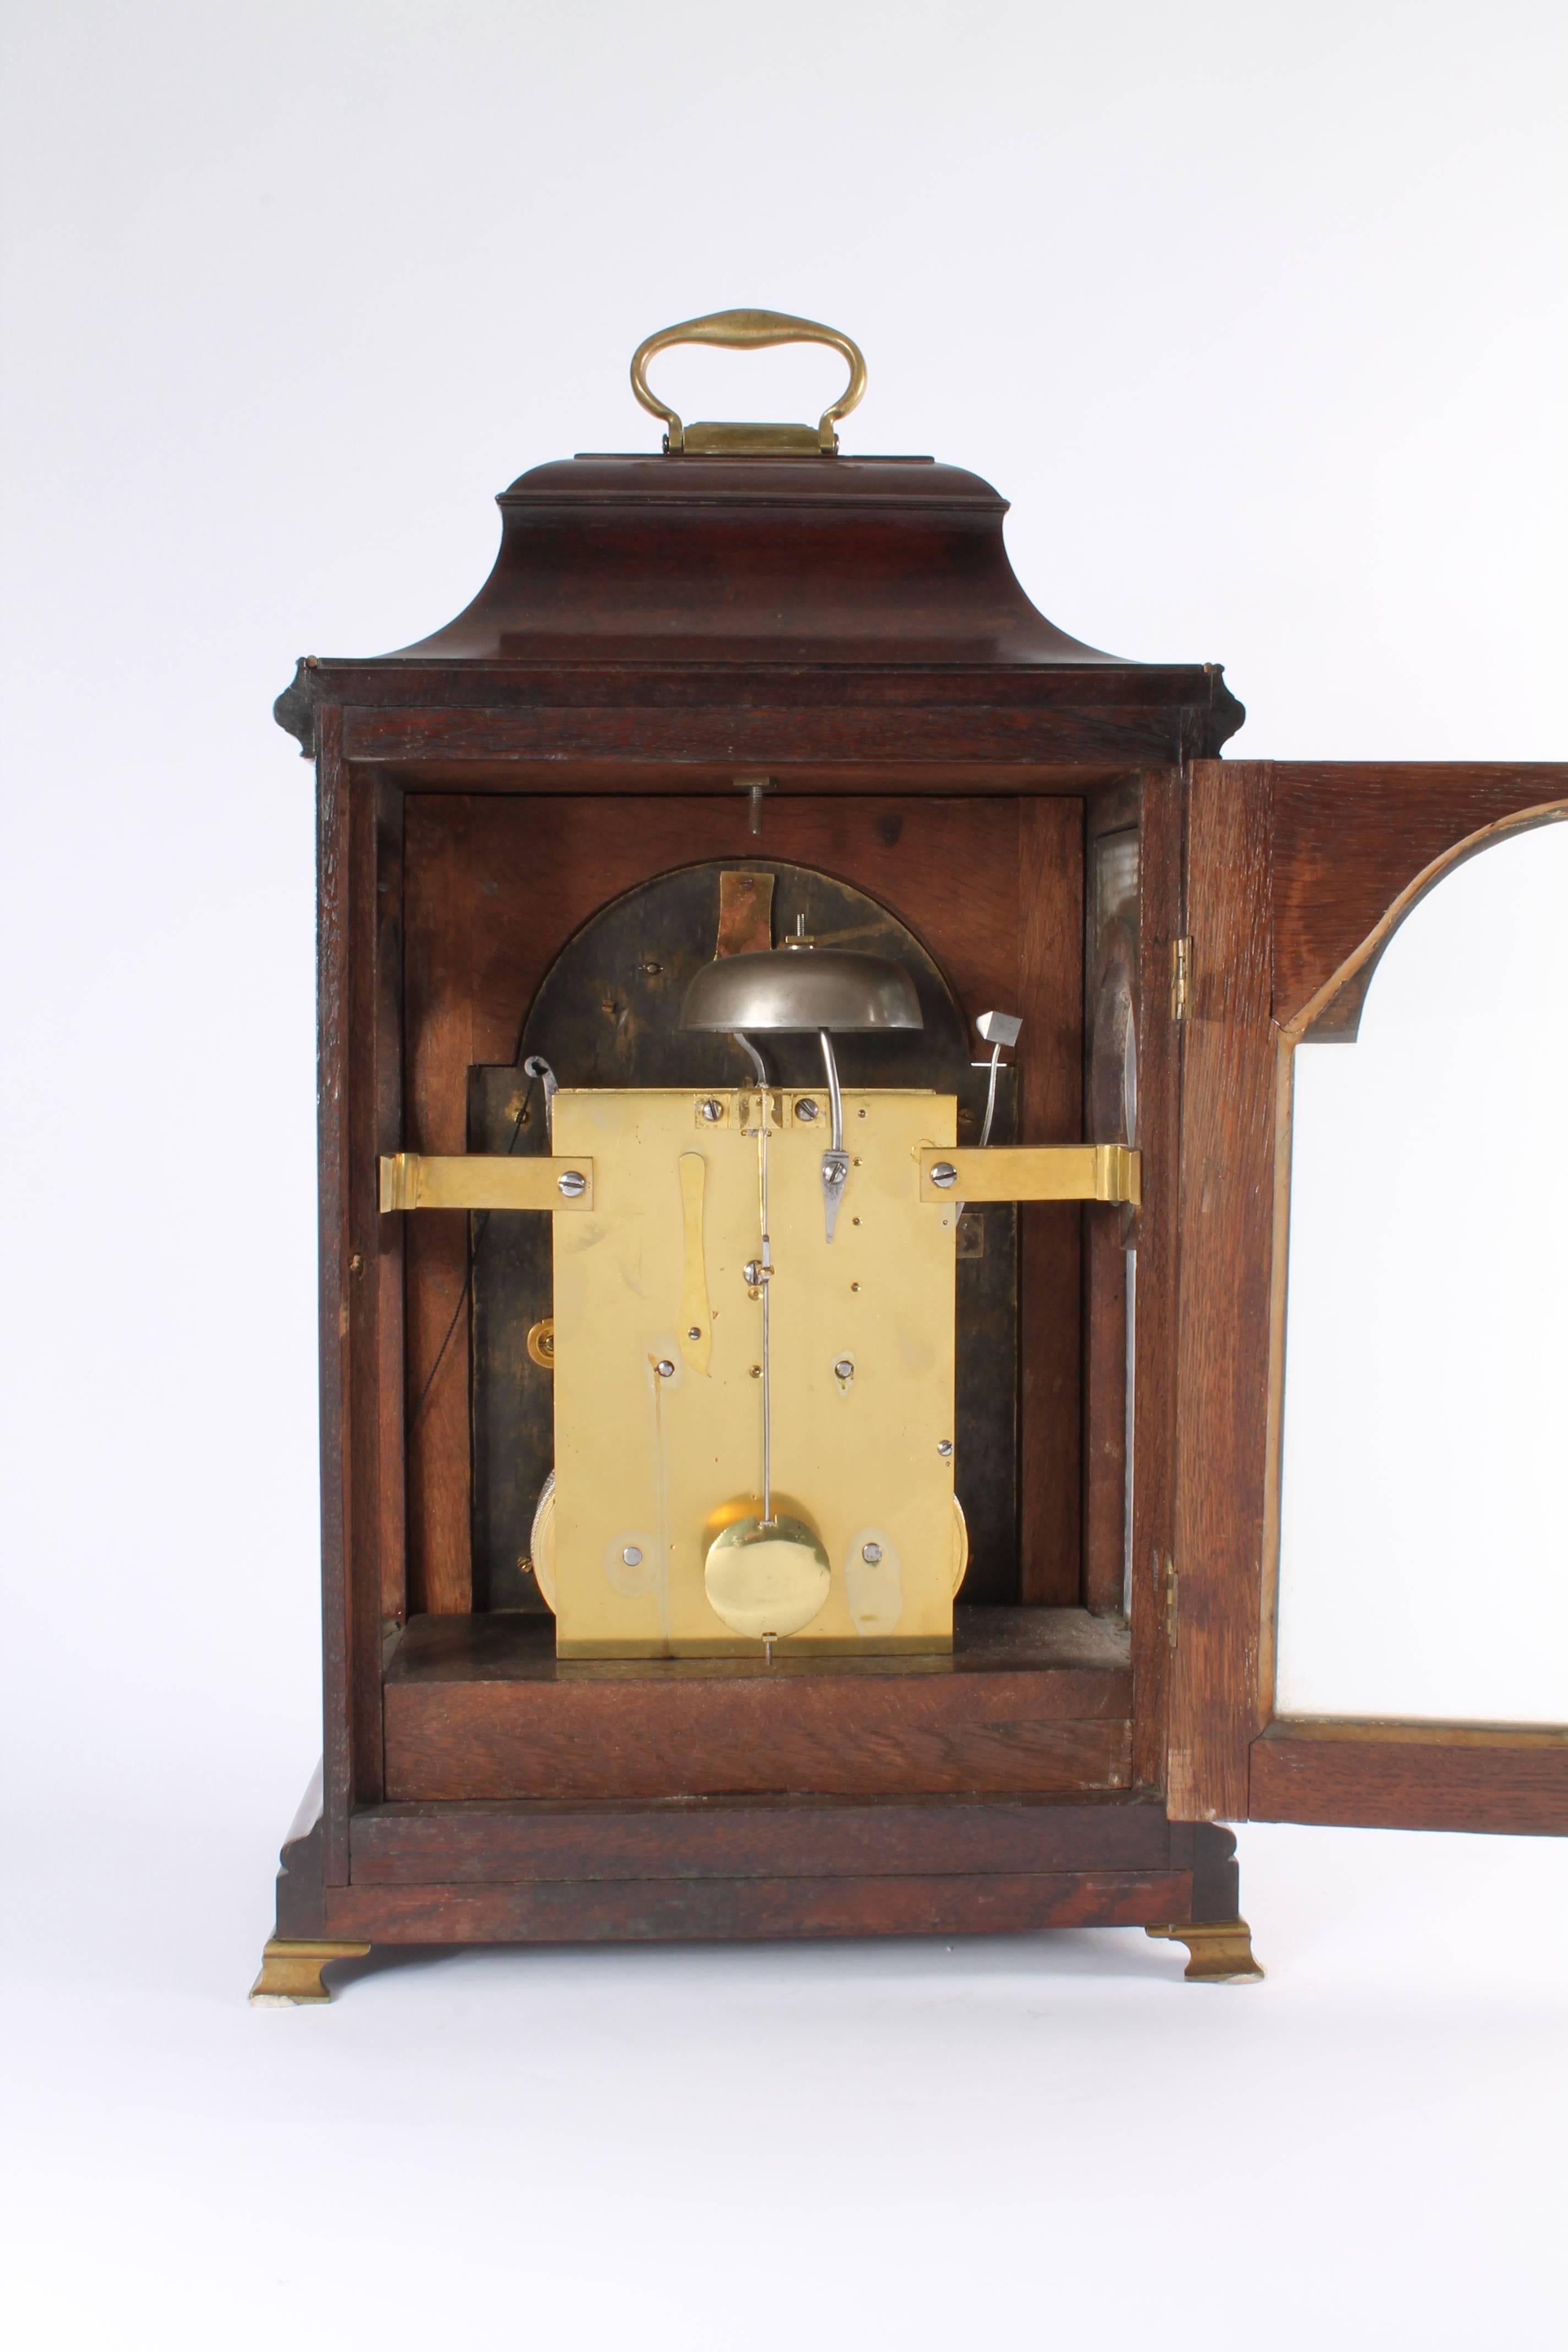 Rare German Mahogany Table Clock by Peter Behrens Schleswig, circa 1770 In Good Condition For Sale In Amsterdam, Noord Holland